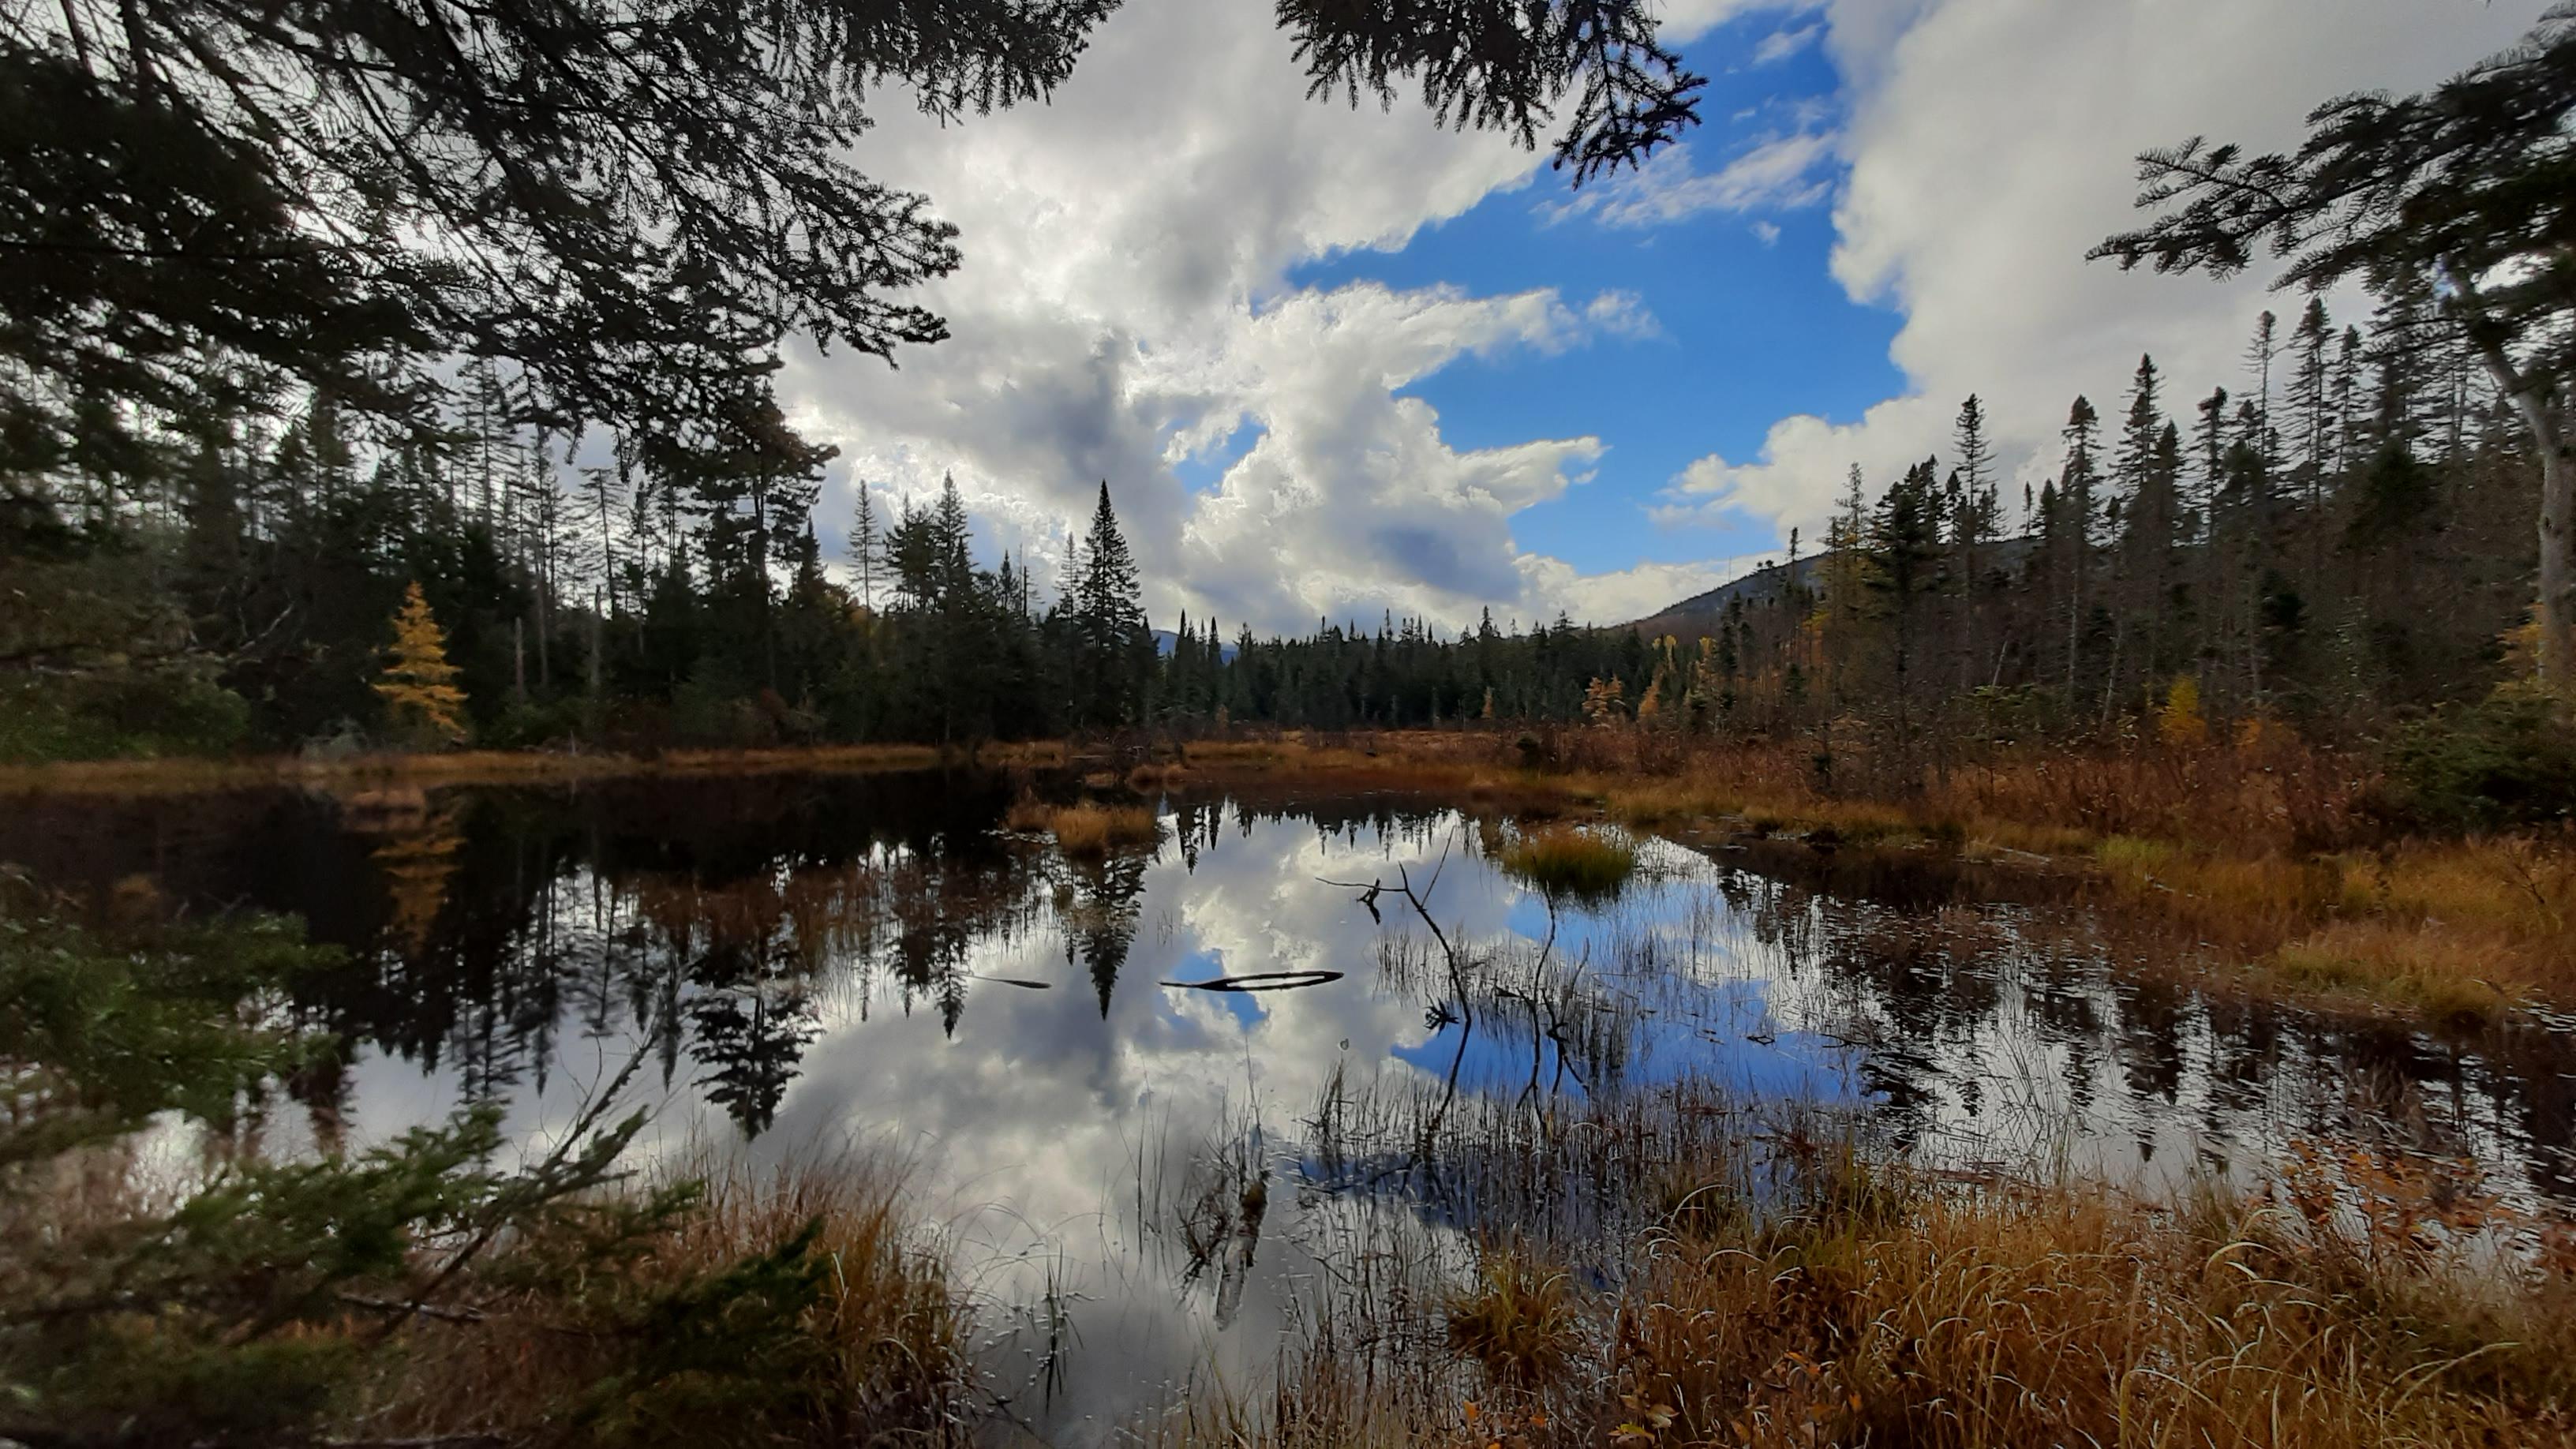 An Adirondack wetland and surrounding forests